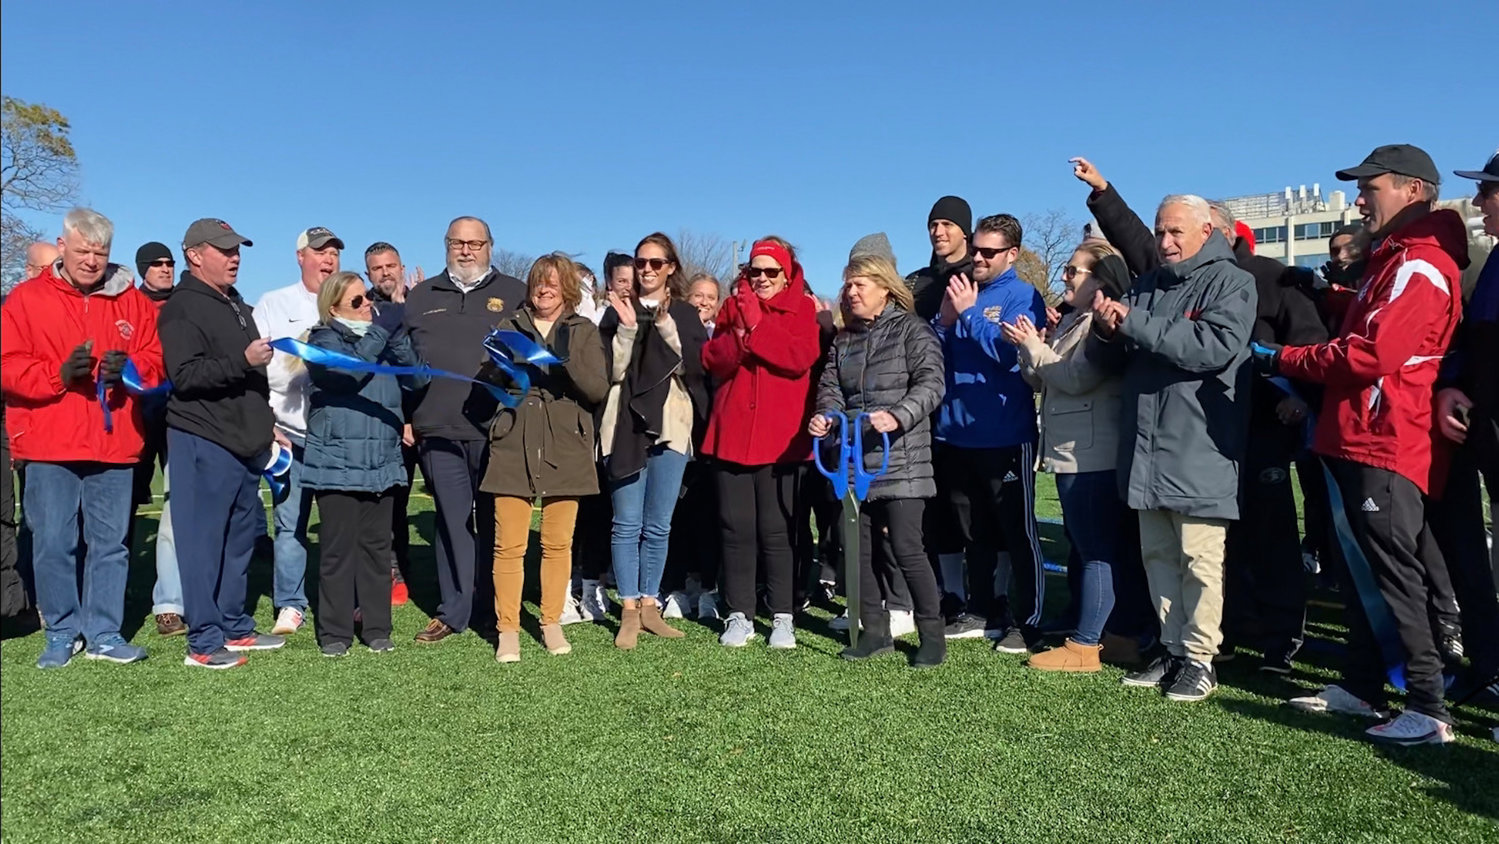 Kathleen Tighe, center right, with scissors, cut the ribbon on the new Tighe Field. Her late husband, Stephen, touched the lives of many soccer players in Rockville Centre.